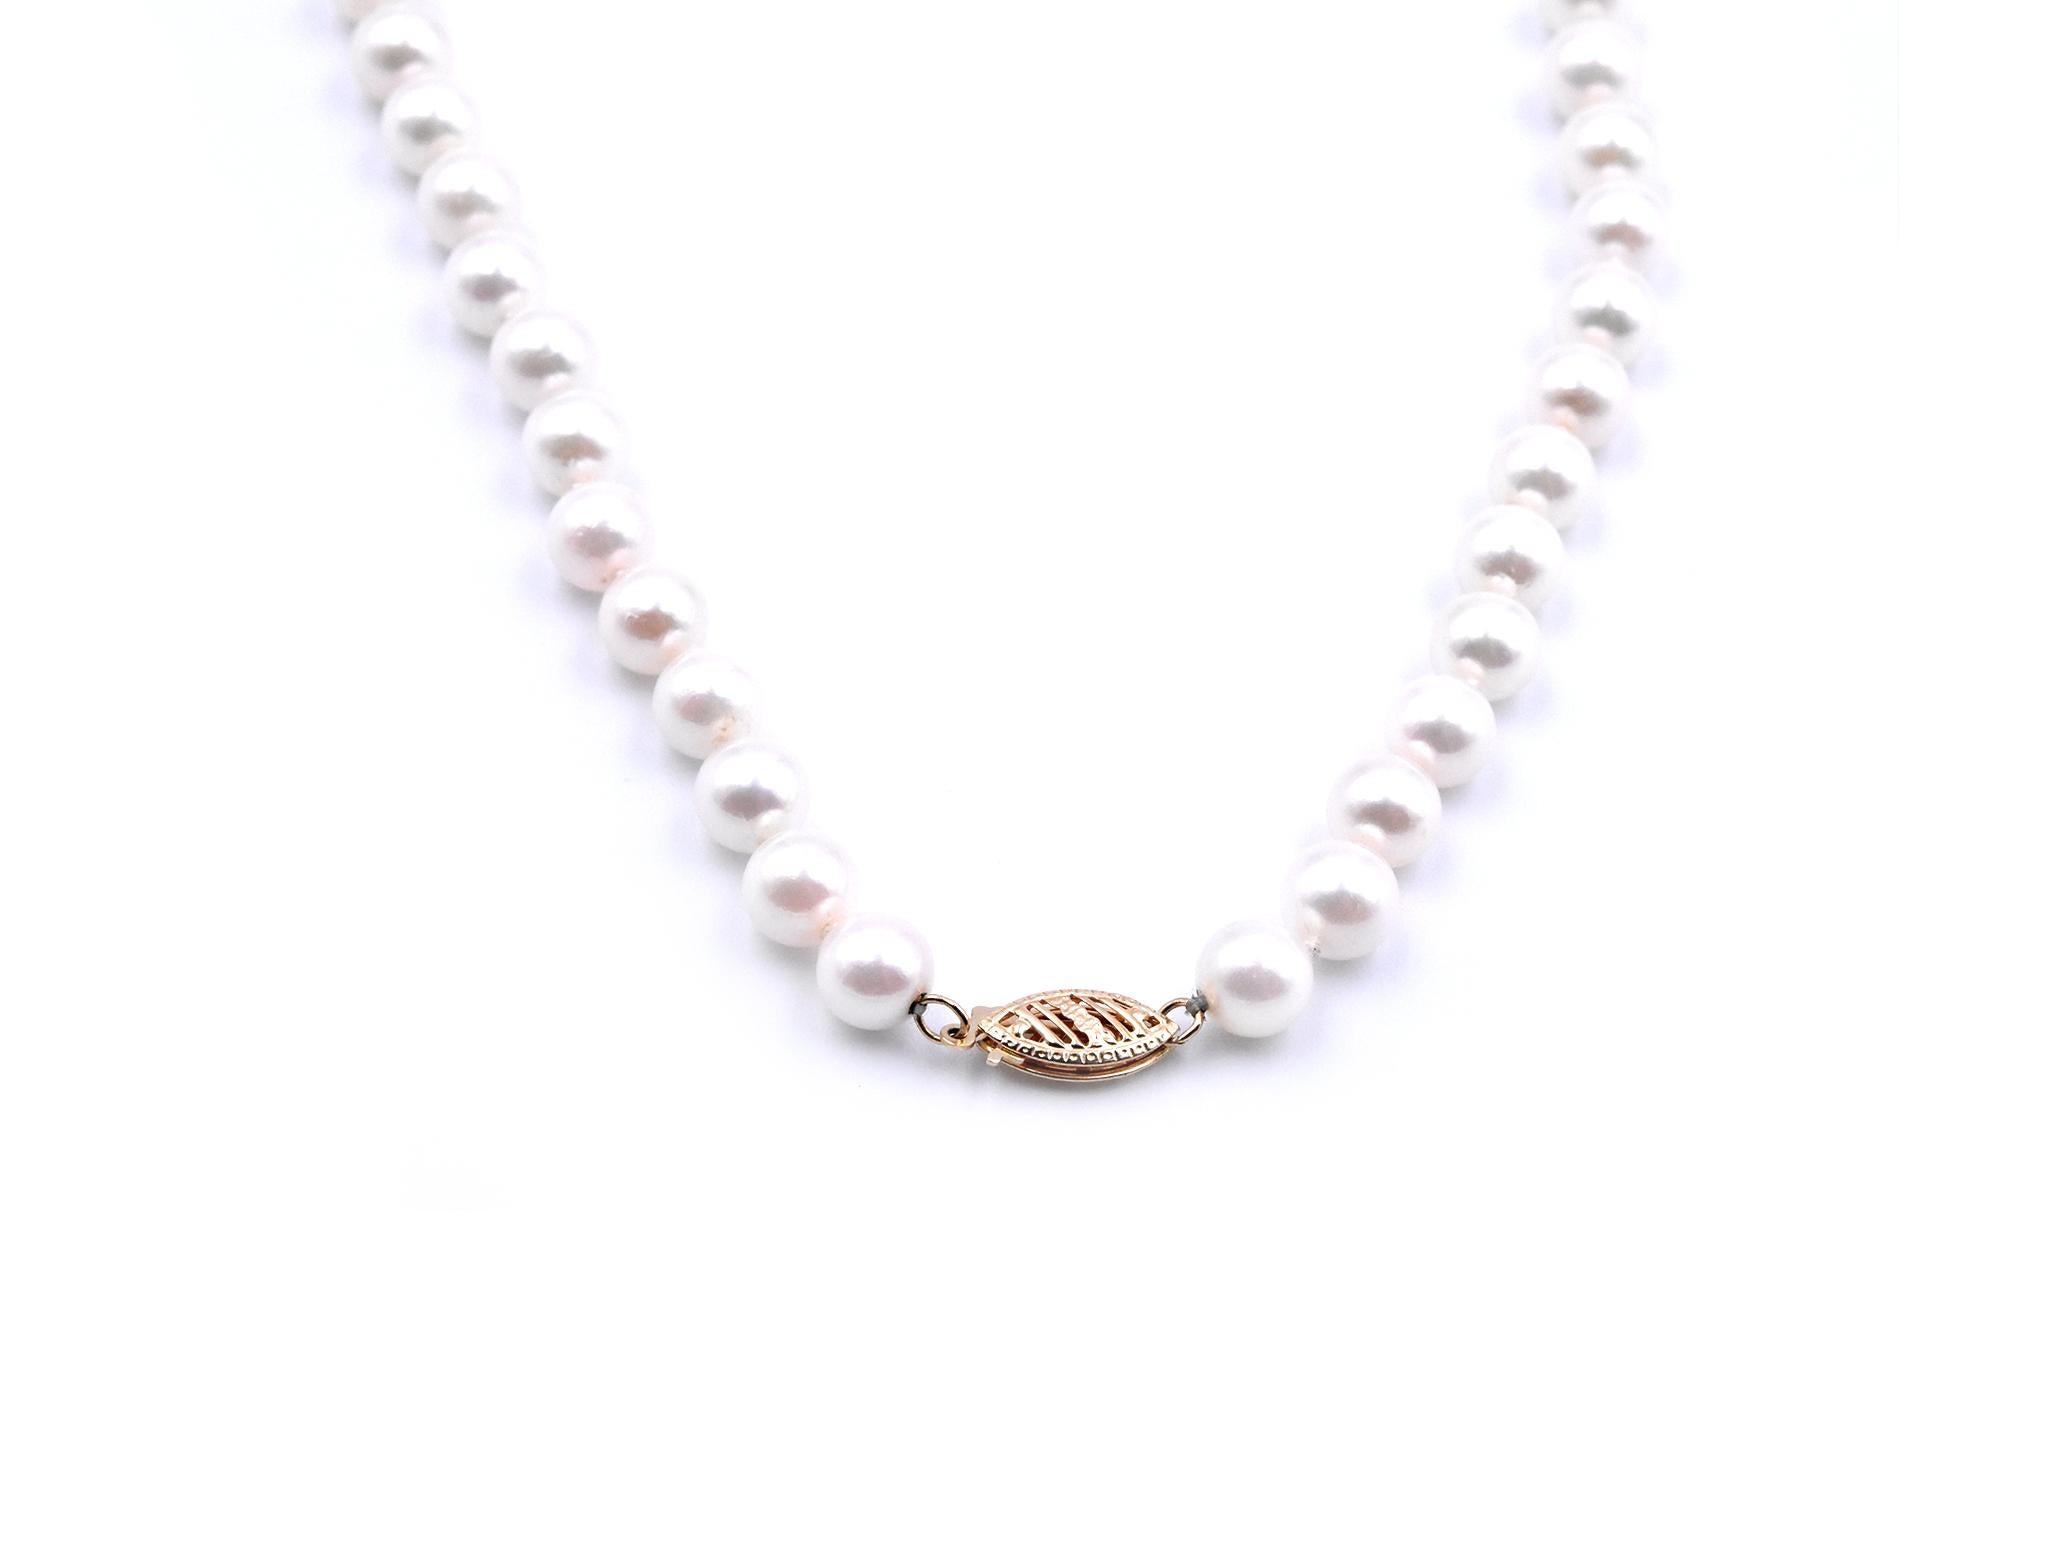 Designer: custom design 
Material: 14k yellow gold
Pearls: 6.55mm akoya cultured pearls
Dimensions: necklace measures 18 inches in length
Weight: 26.94 grams
